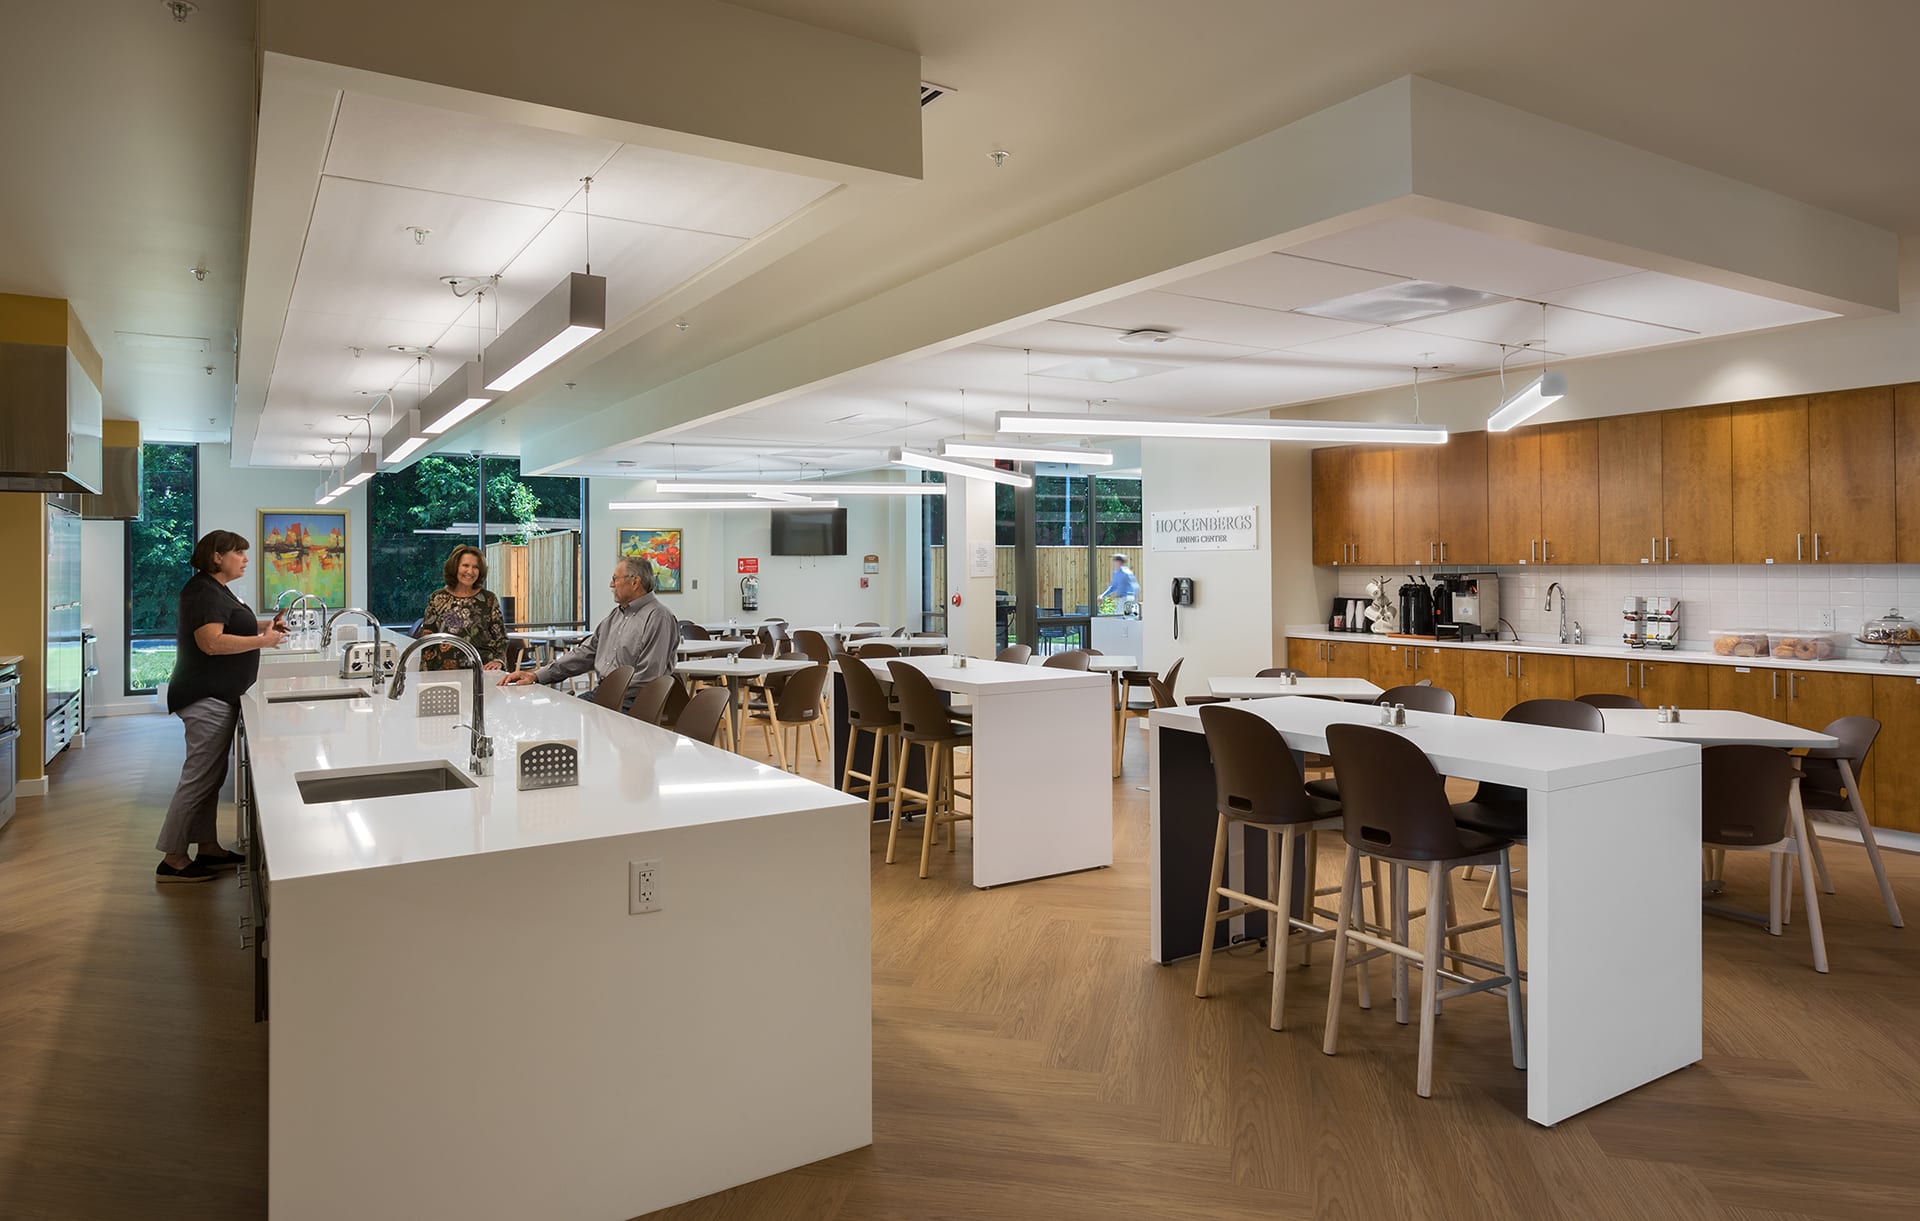 interior of american cancer society kitchen lodge designed by trivers architectural firm in st. louis